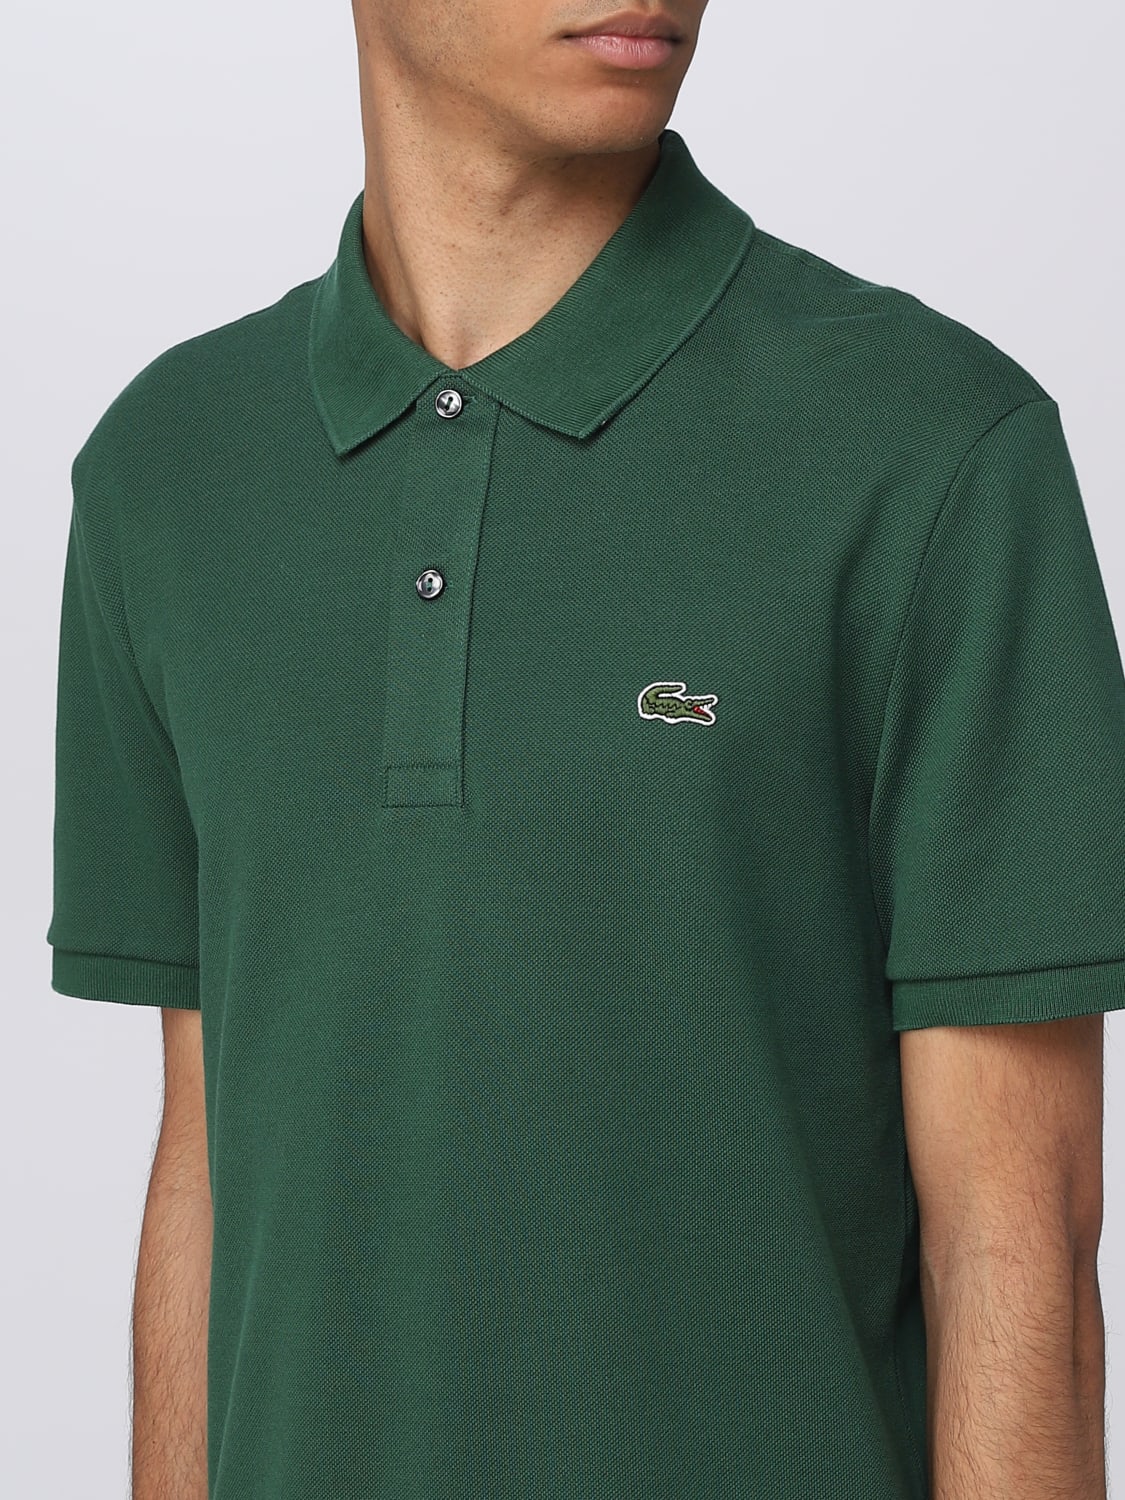 LACOSTE: polo shirt for man - Forest Green | Lacoste polo shirt PH4012 ...